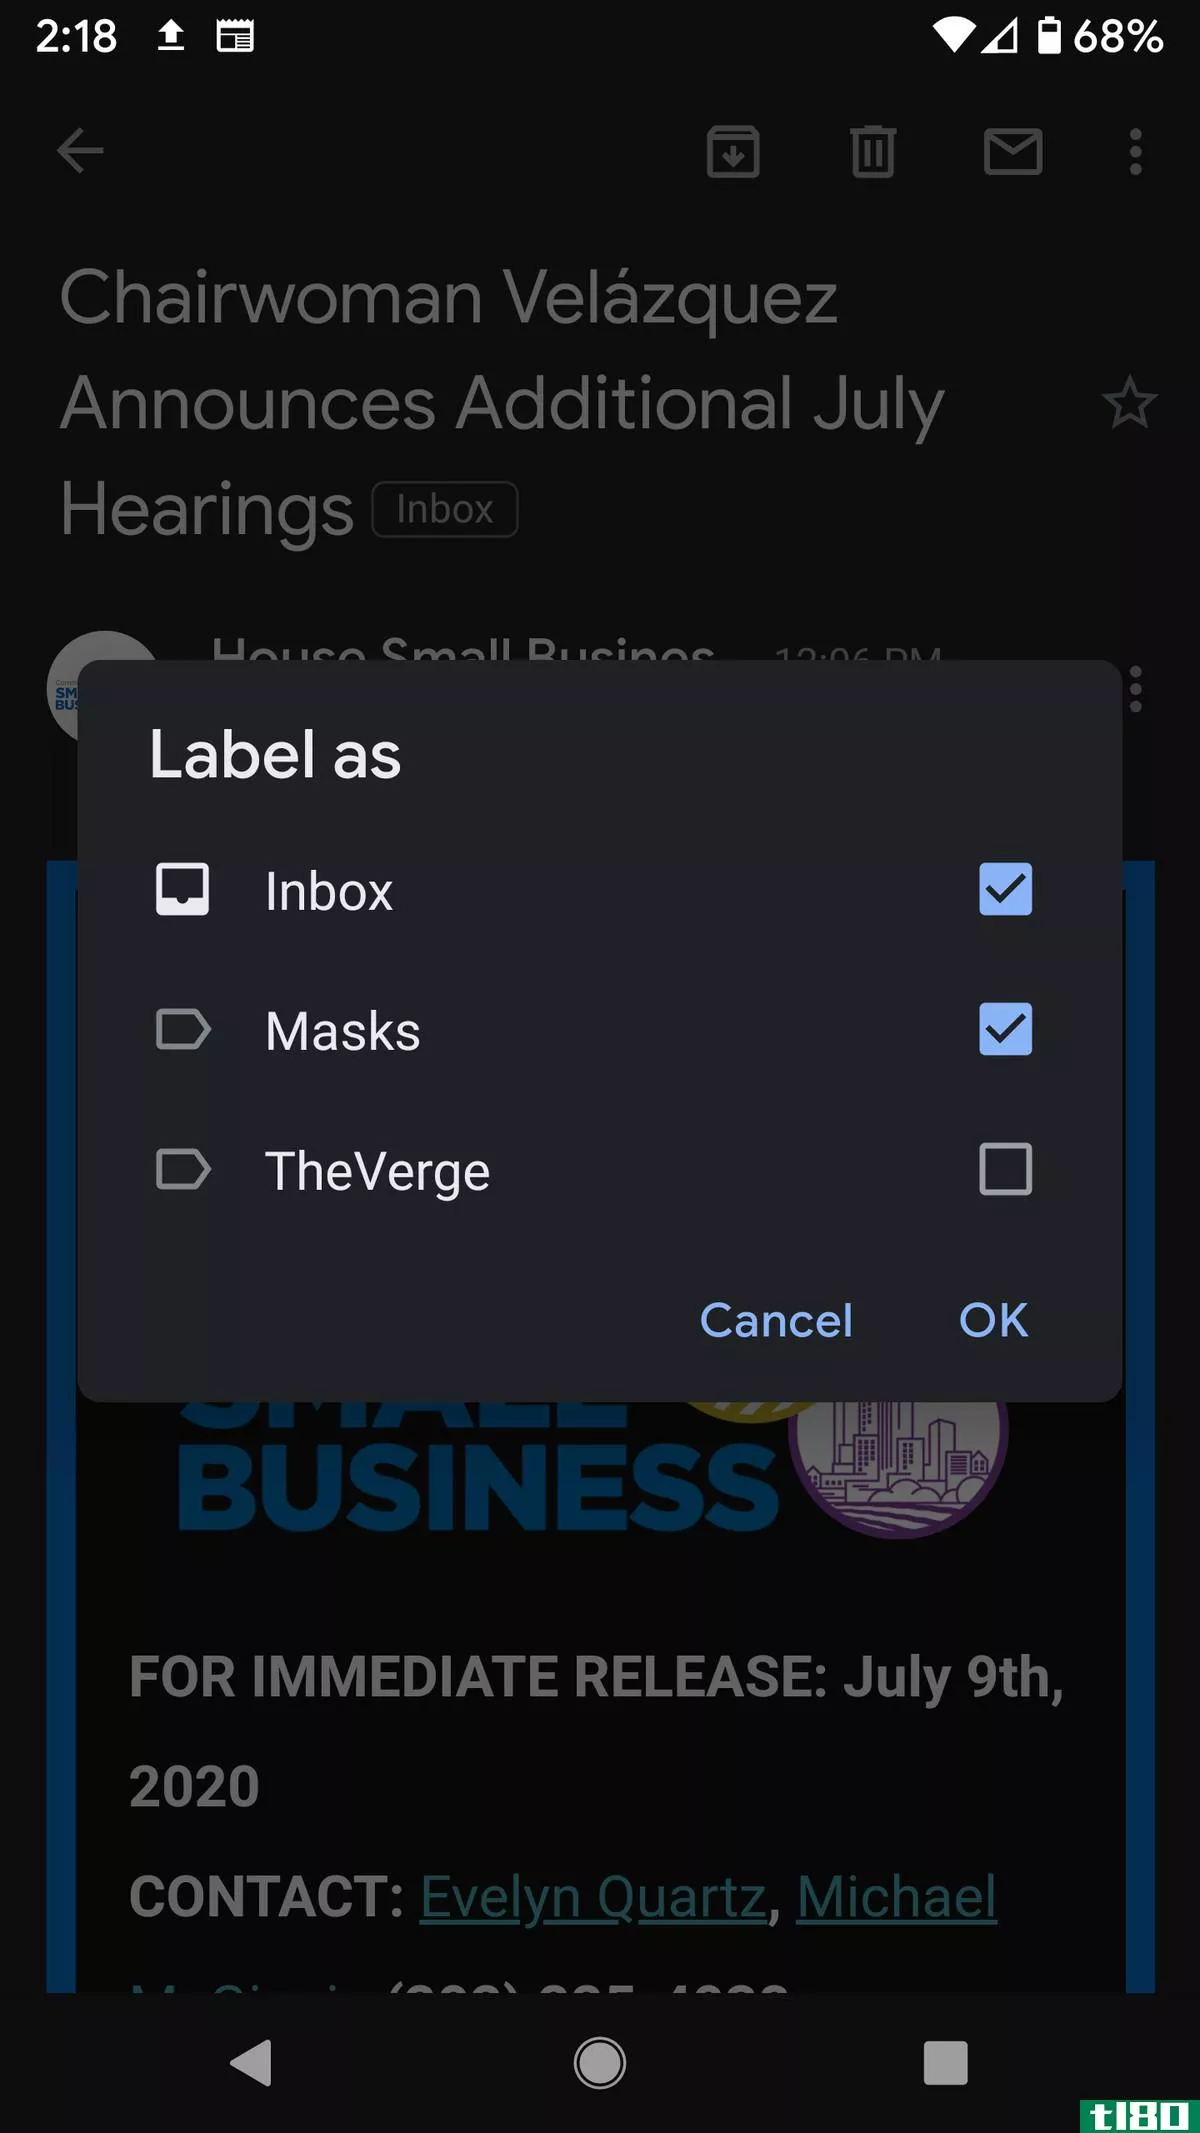 Select the labels you want to apply to the email.